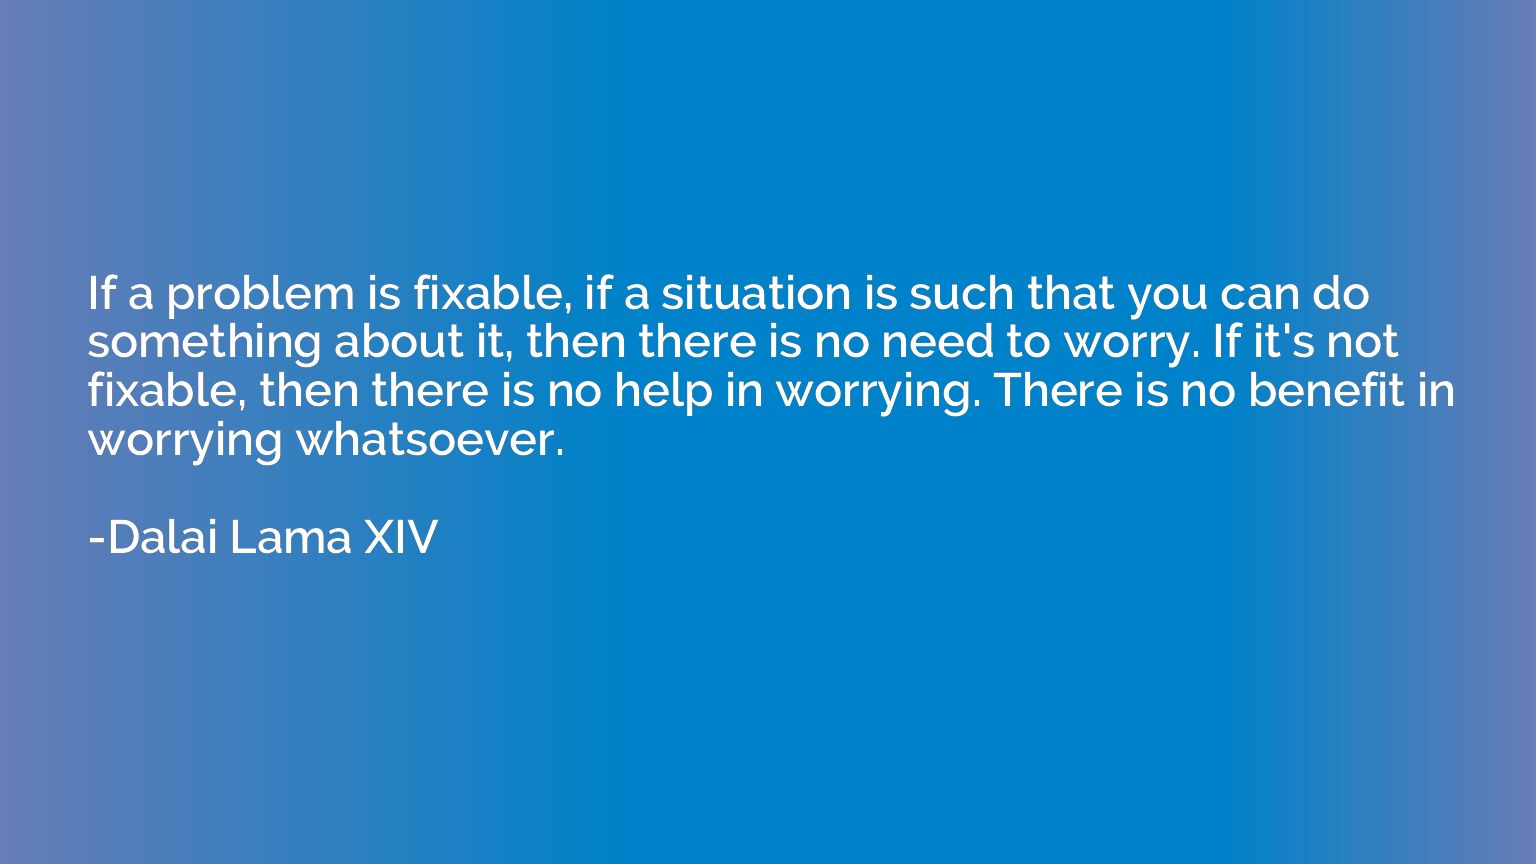 If a problem is fixable, if a situation is such that you can